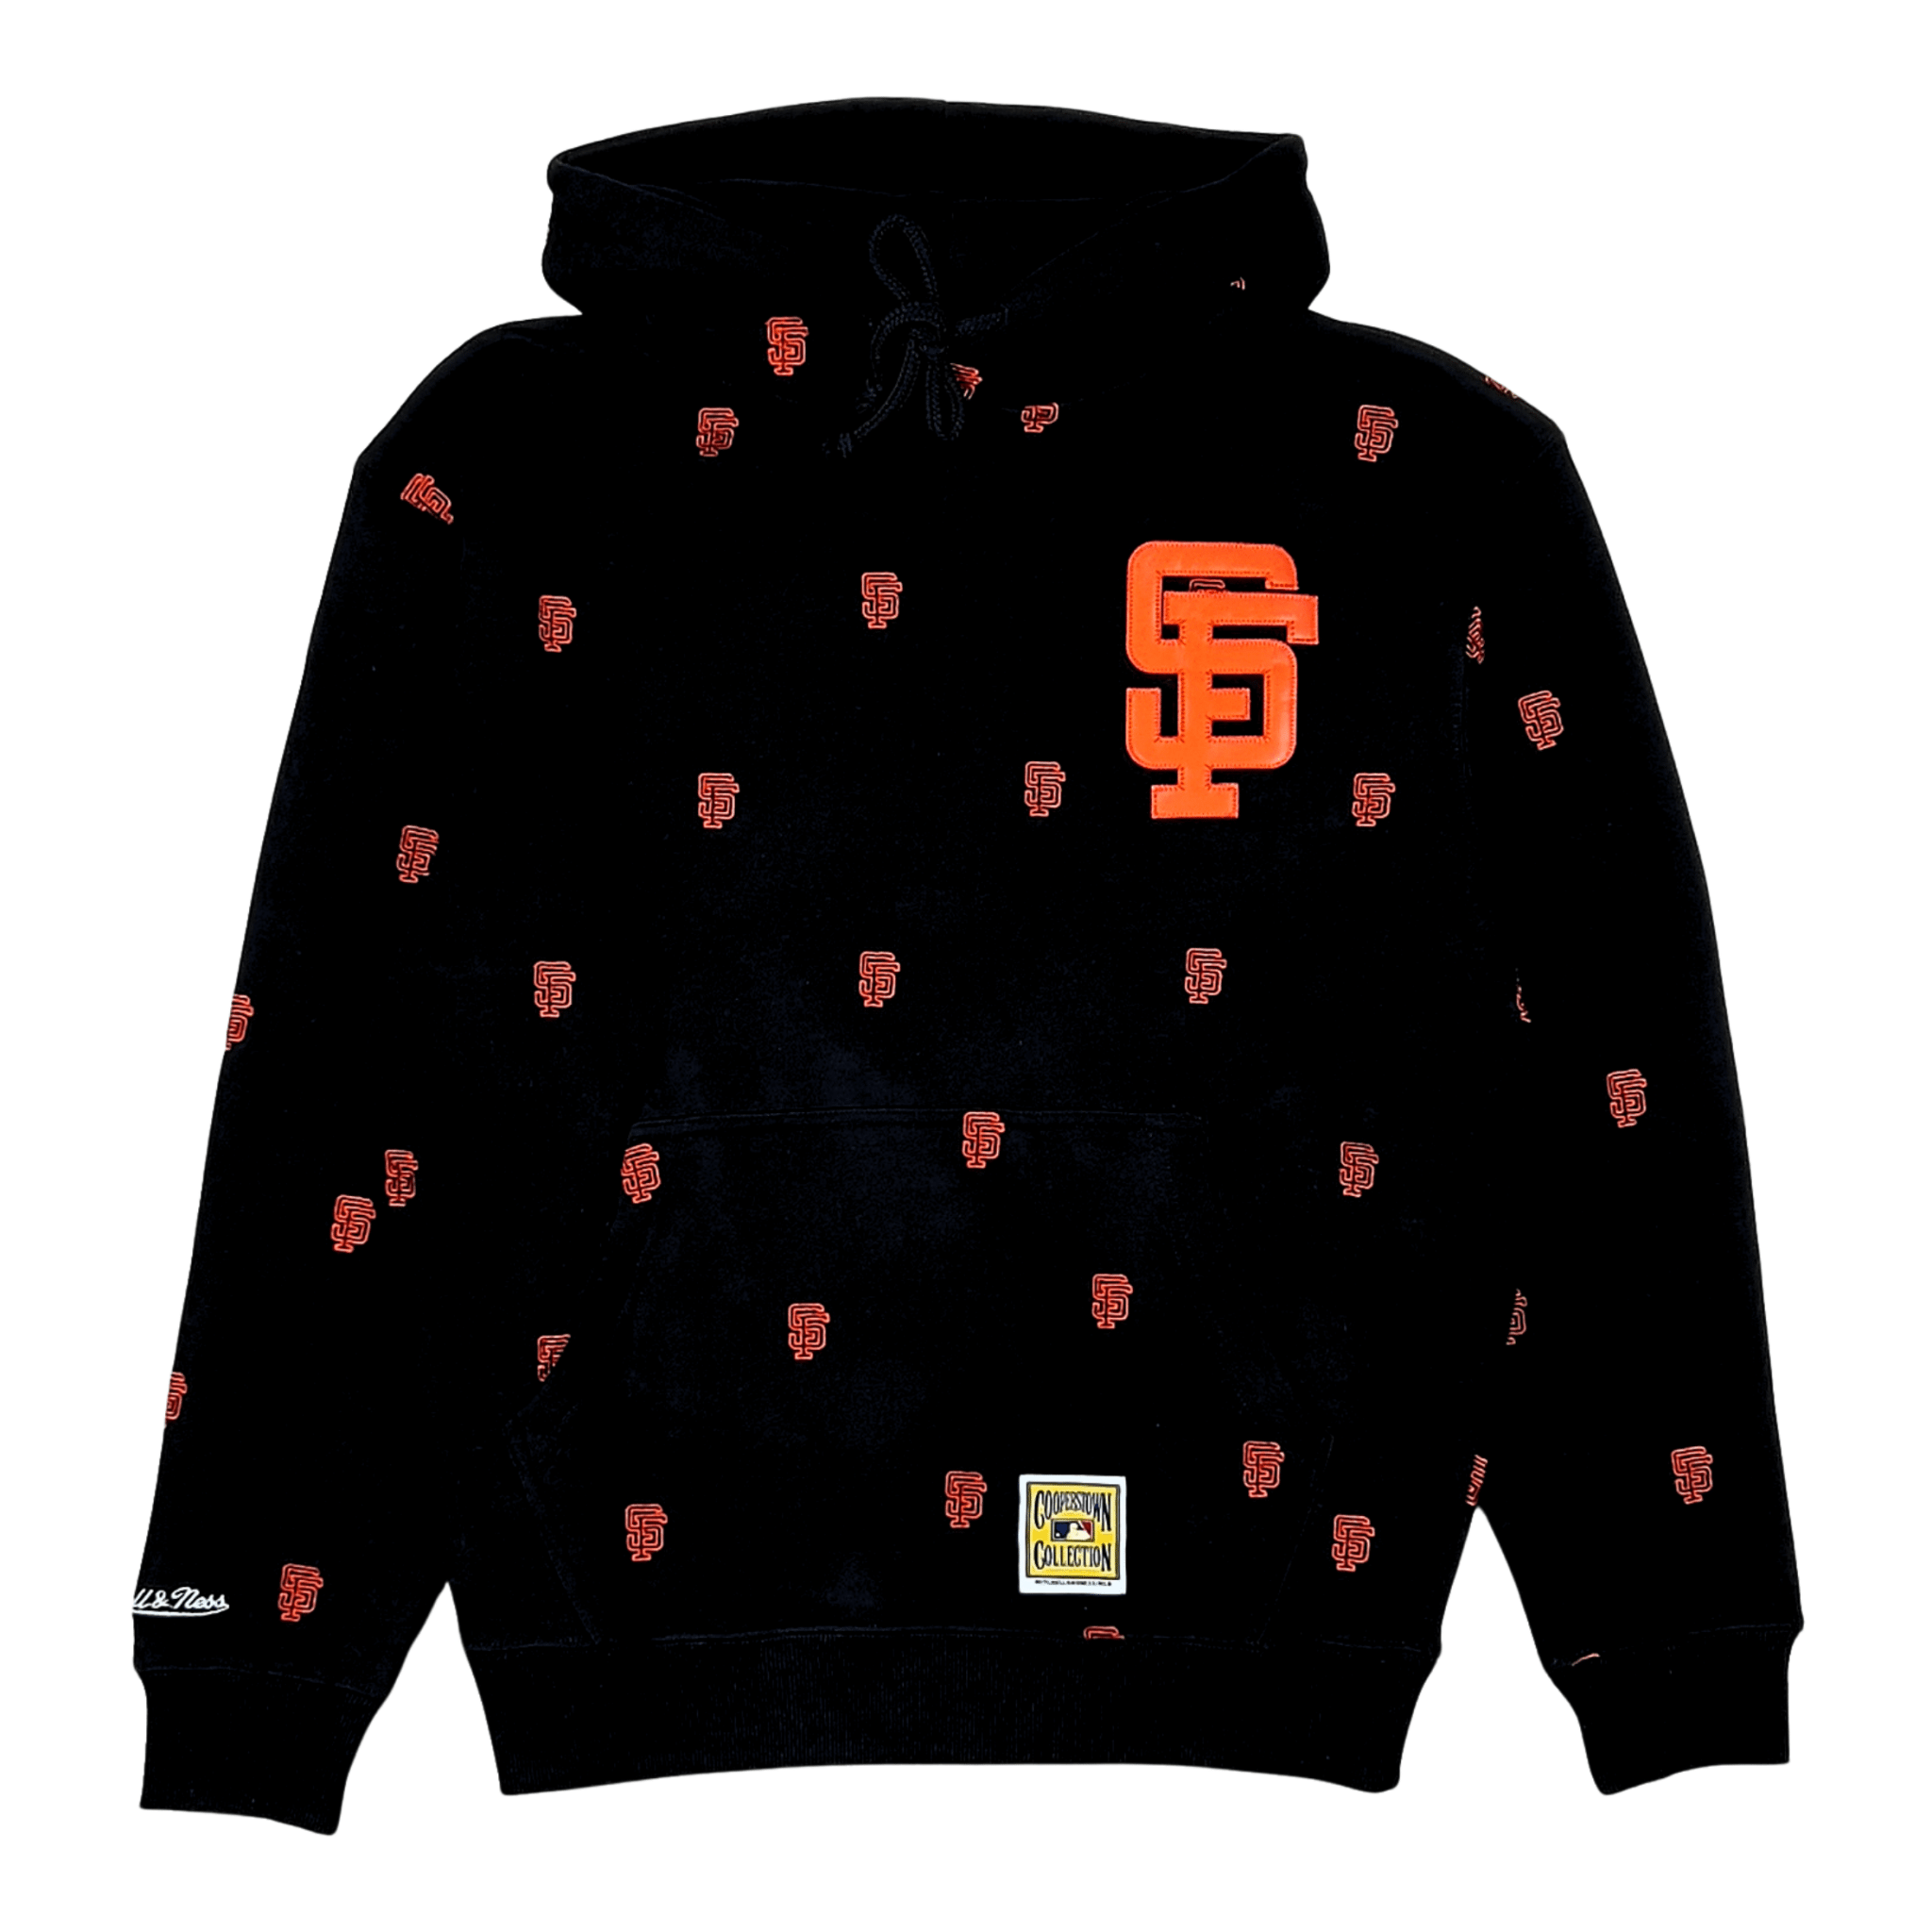 San Francisco Giants Repeat Hoodie in black - Mitchell & Ness - State Of Flux